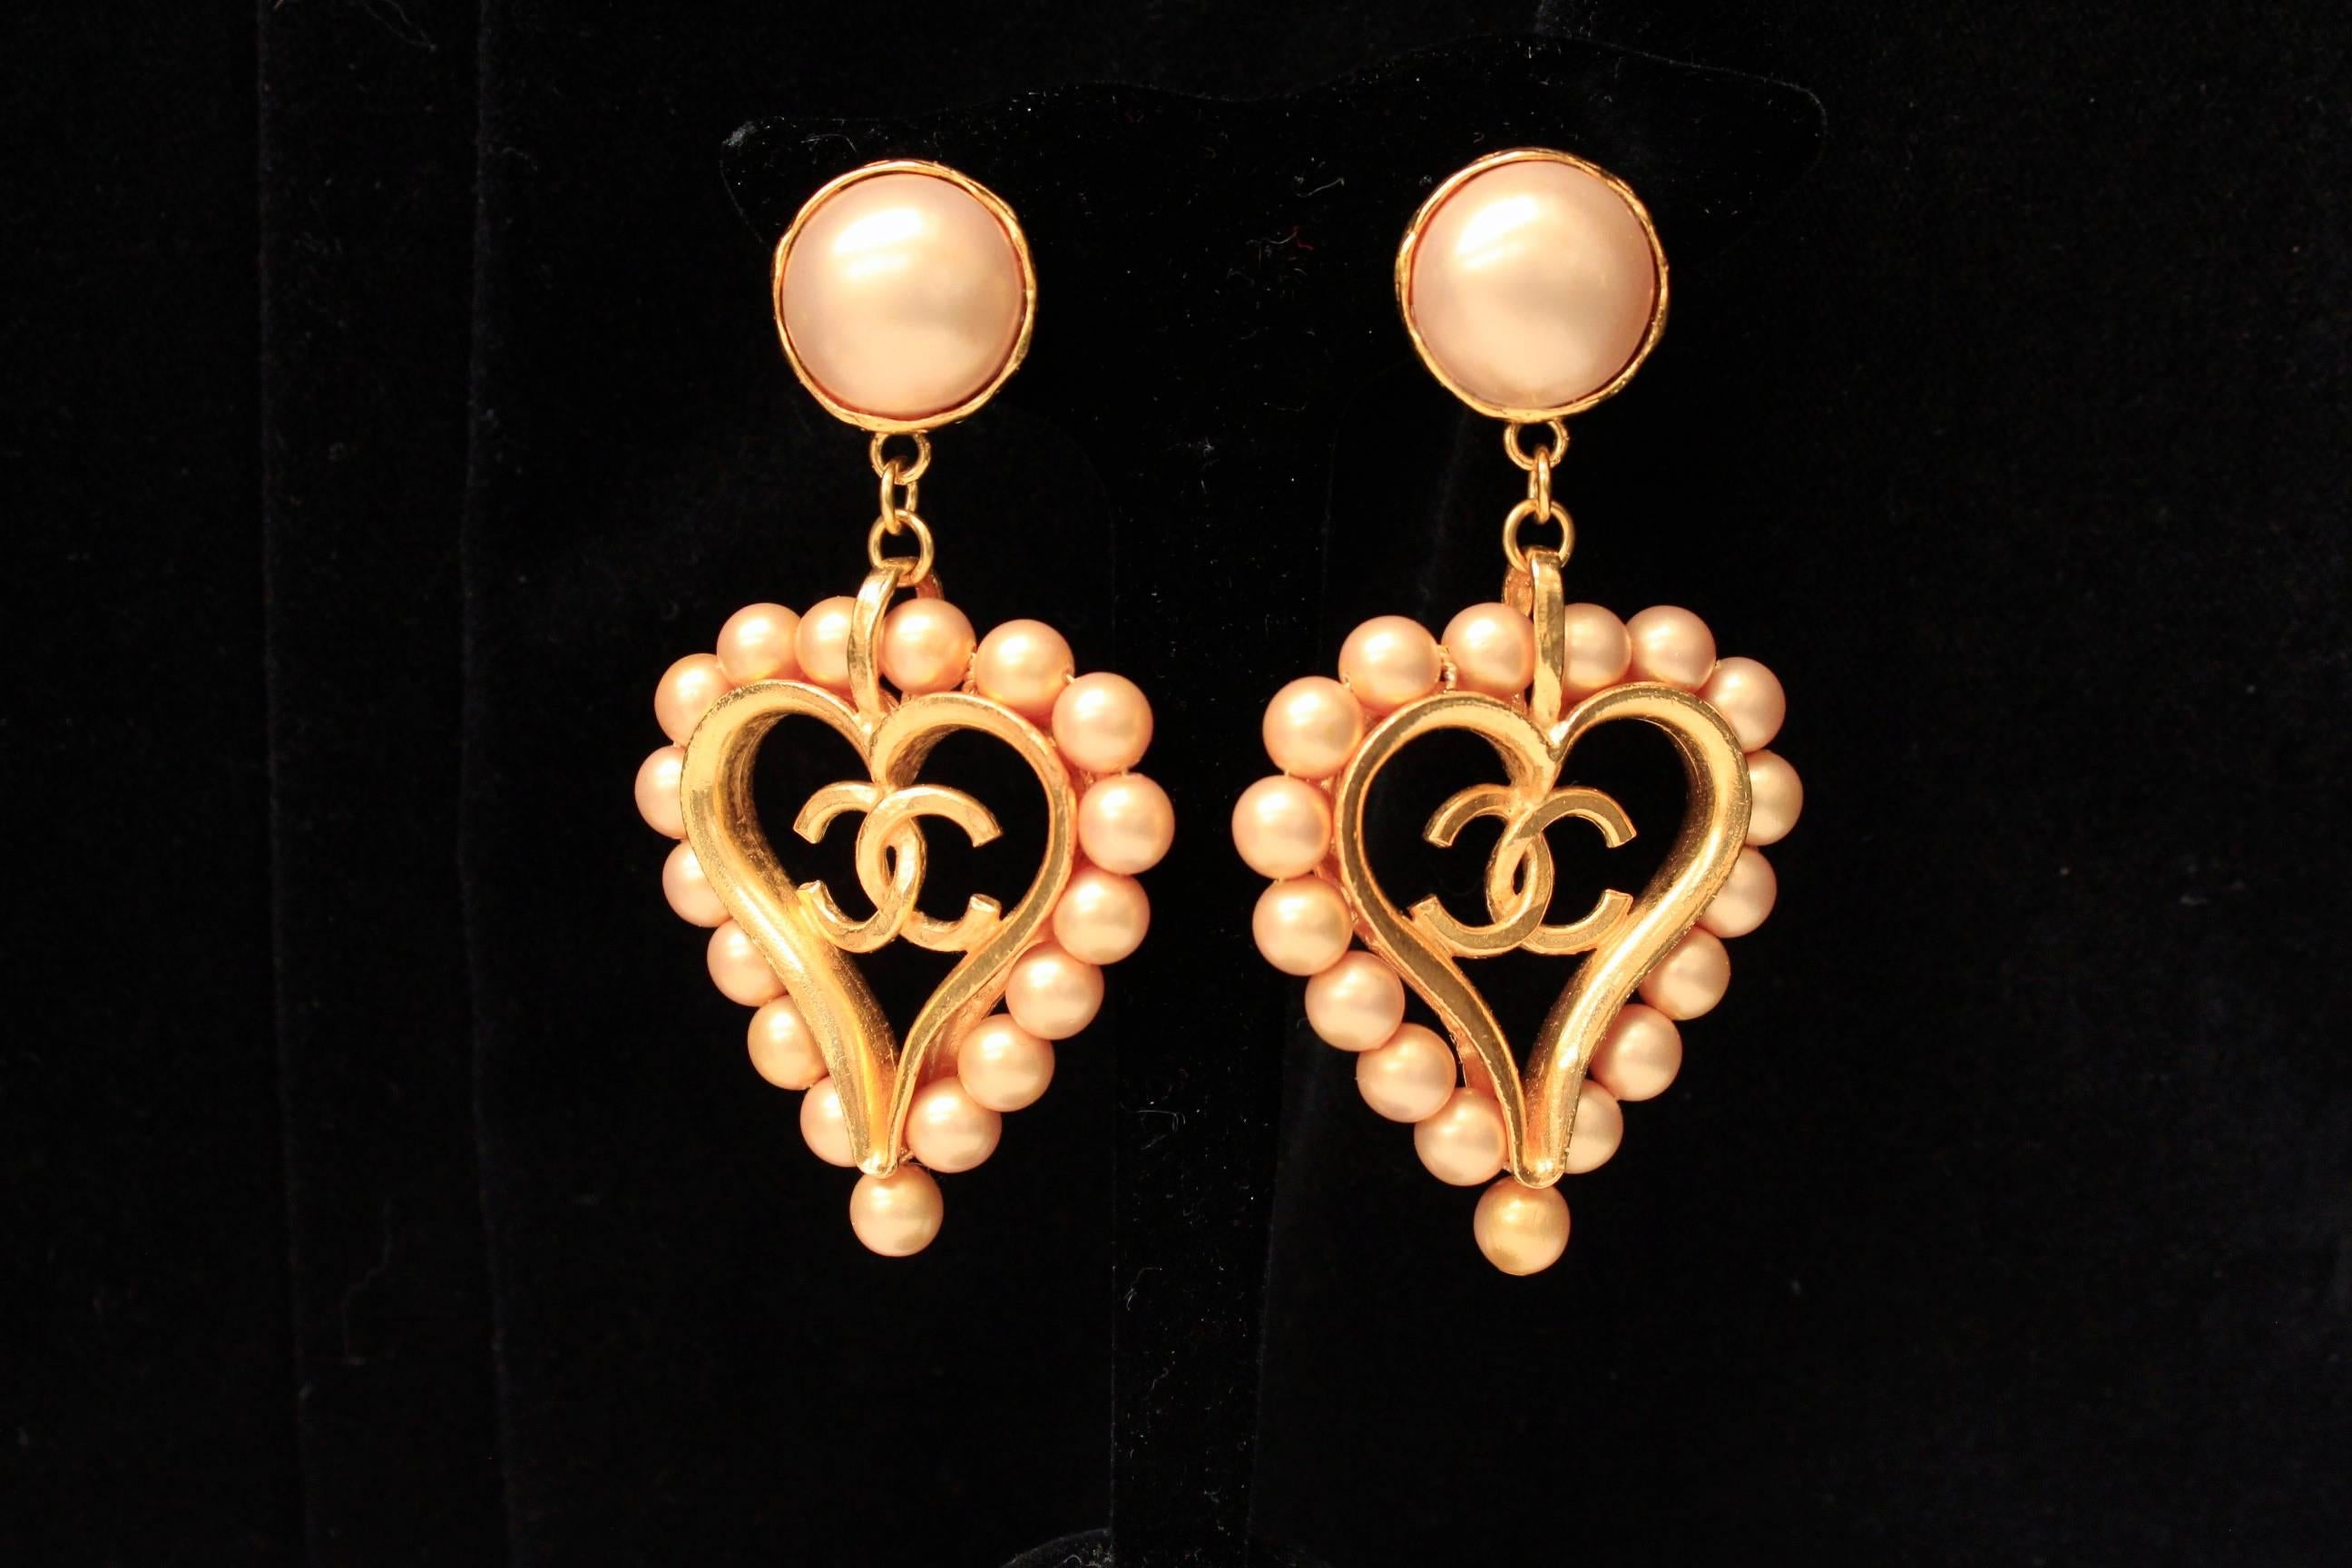 CHANEL (Made in France) Drop earrings composed of a gilded metal clip set with a gold tone pearly glass paste cabochon. The drop part represents an openwork gilded metal heart with CC logo, surrounded with small golden beads.

Signed at back.

2cc8